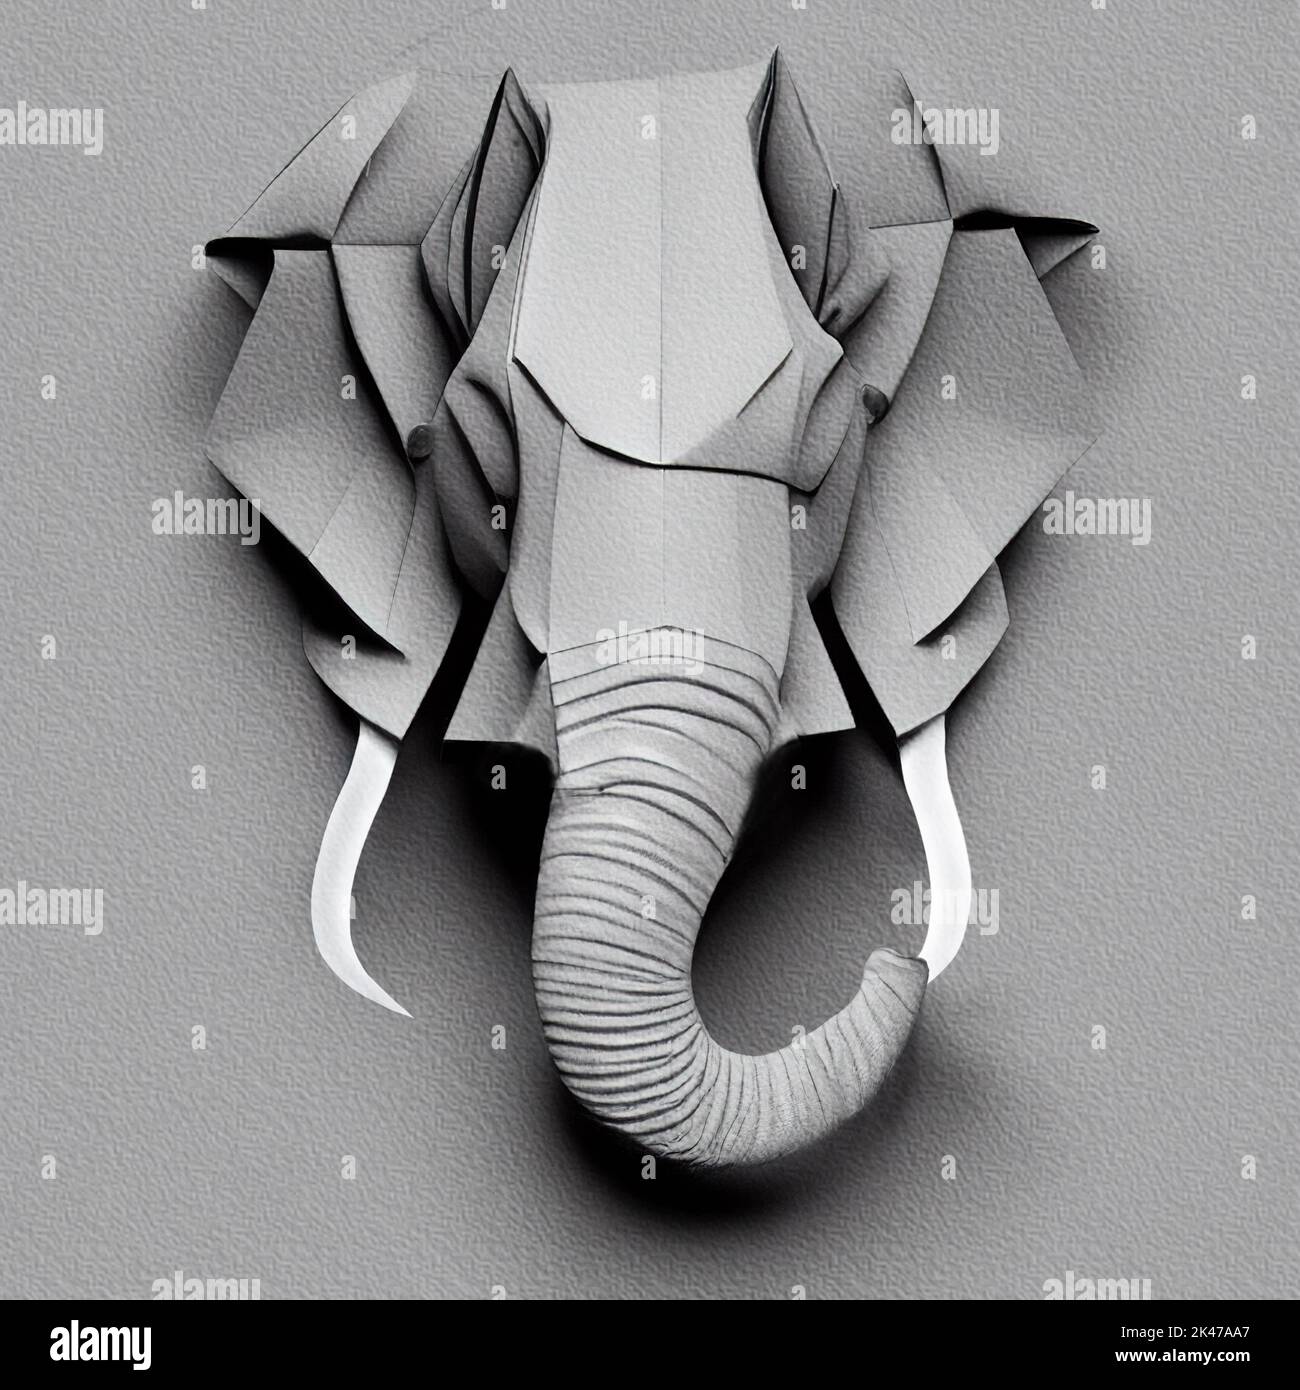 3D rendering of gray elephant head in paper origami style Stock Photo